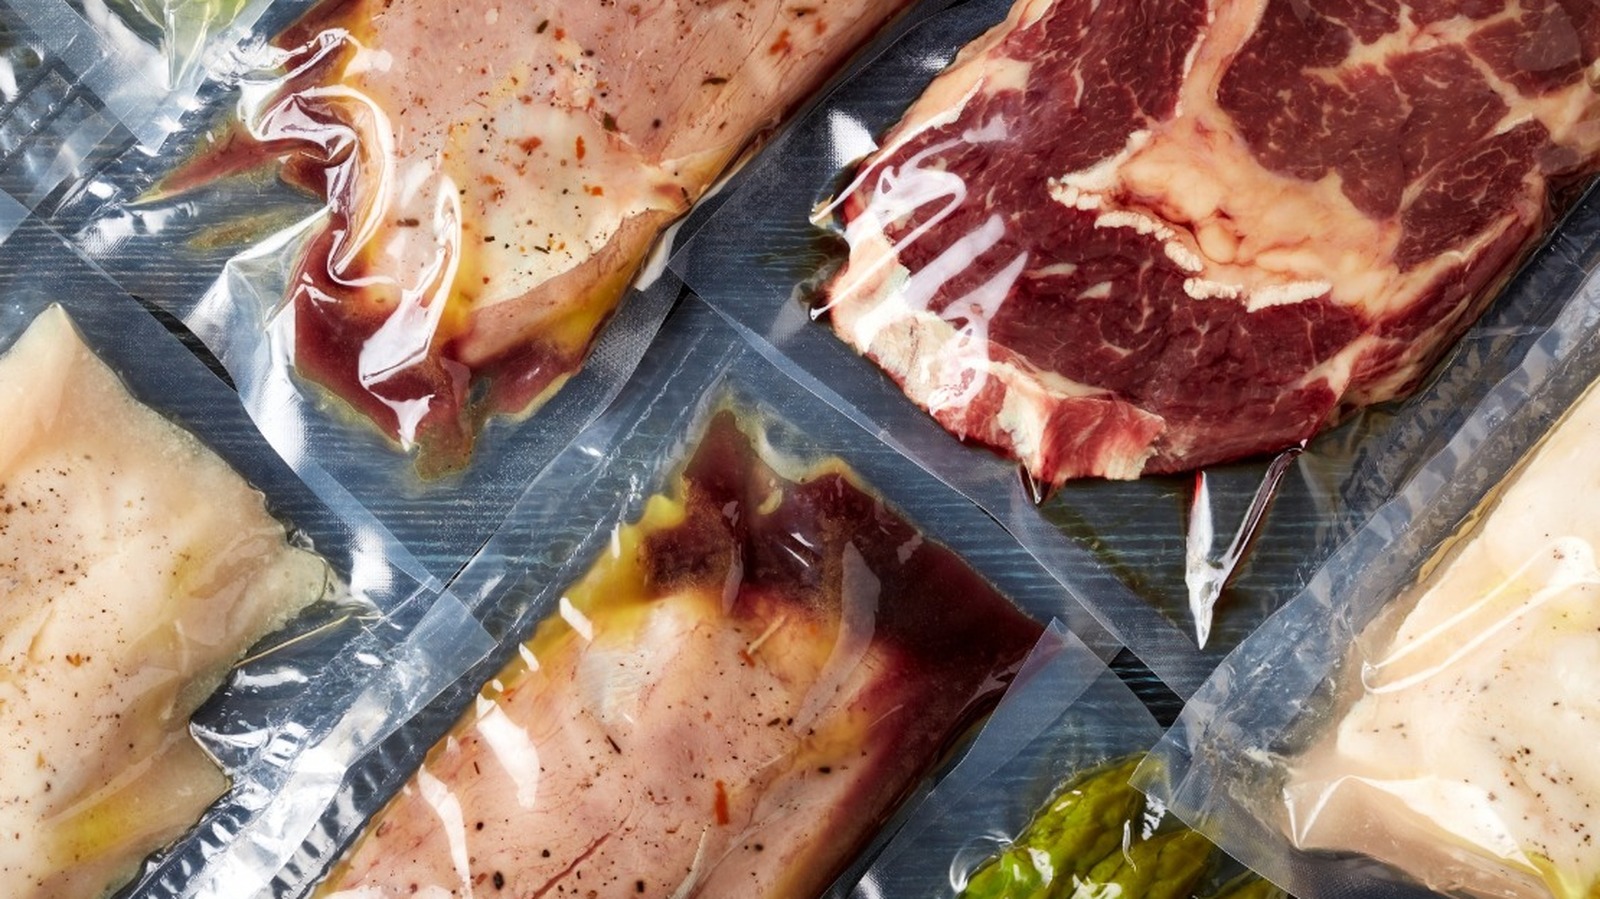 https://www.mashed.com/img/gallery/why-you-should-buy-vacuum-sealed-meat-according-to-michael-symon/l-intro-1648580227.jpg